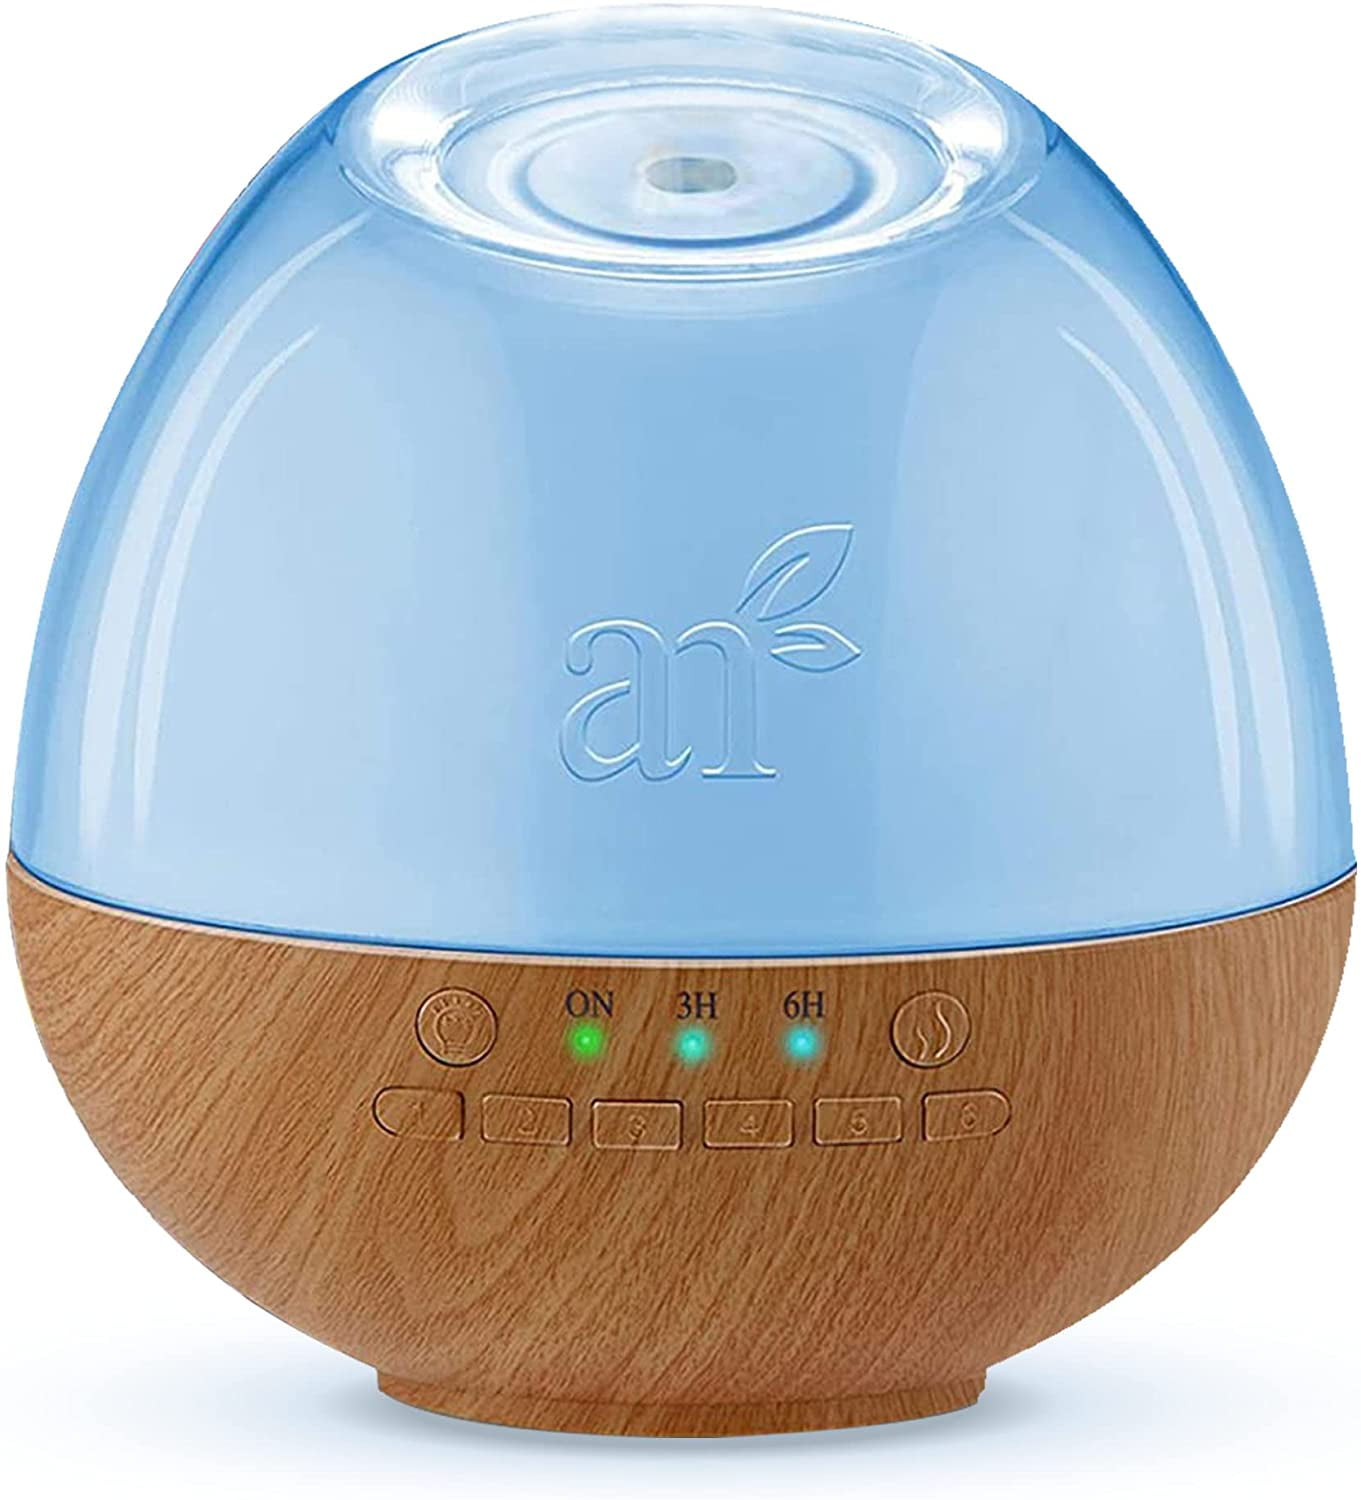 100ml Essential Oil Diffuser Humidifier Aroma LED Night Light Ultrasonic  Cool Mist Fresh Air Aromatherapy From Light_lead, $8.97